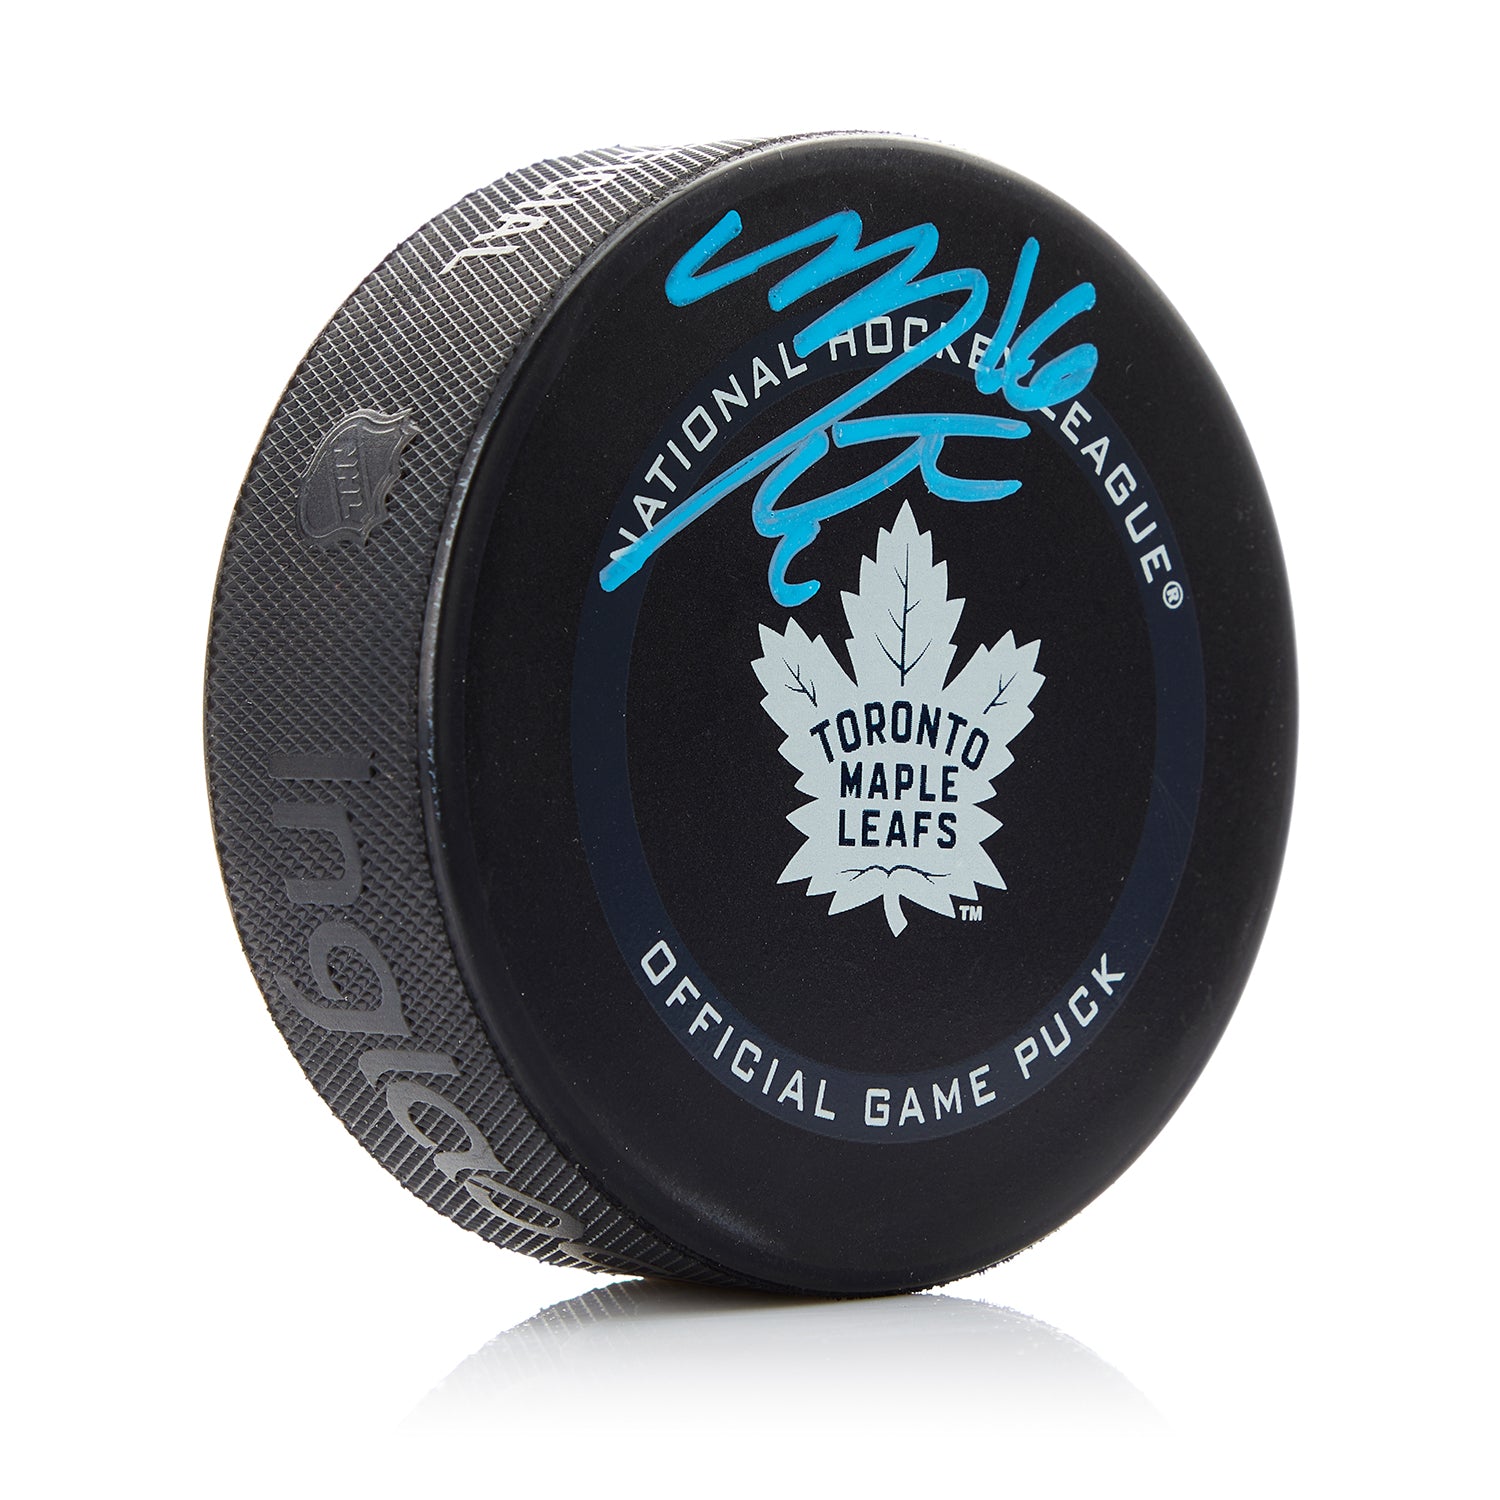 Mitch Marner Signed Toronto Maple Leafs Official Game Puck